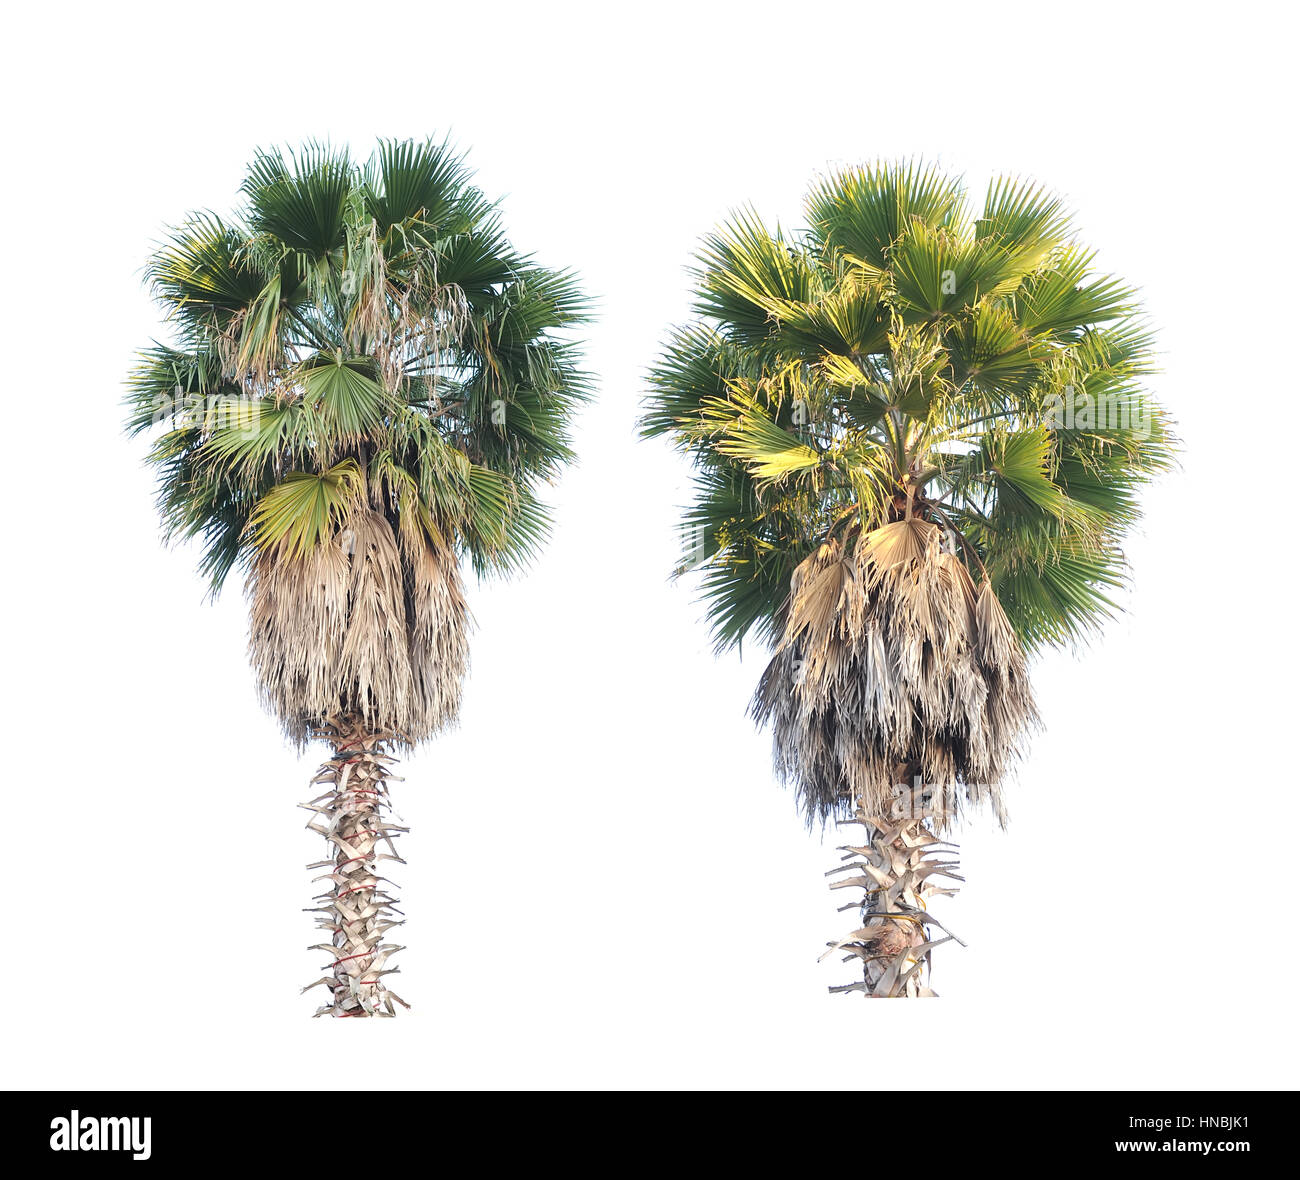 Asian palmyra palm tree Cut Out Stock Images & Pictures - Alamy